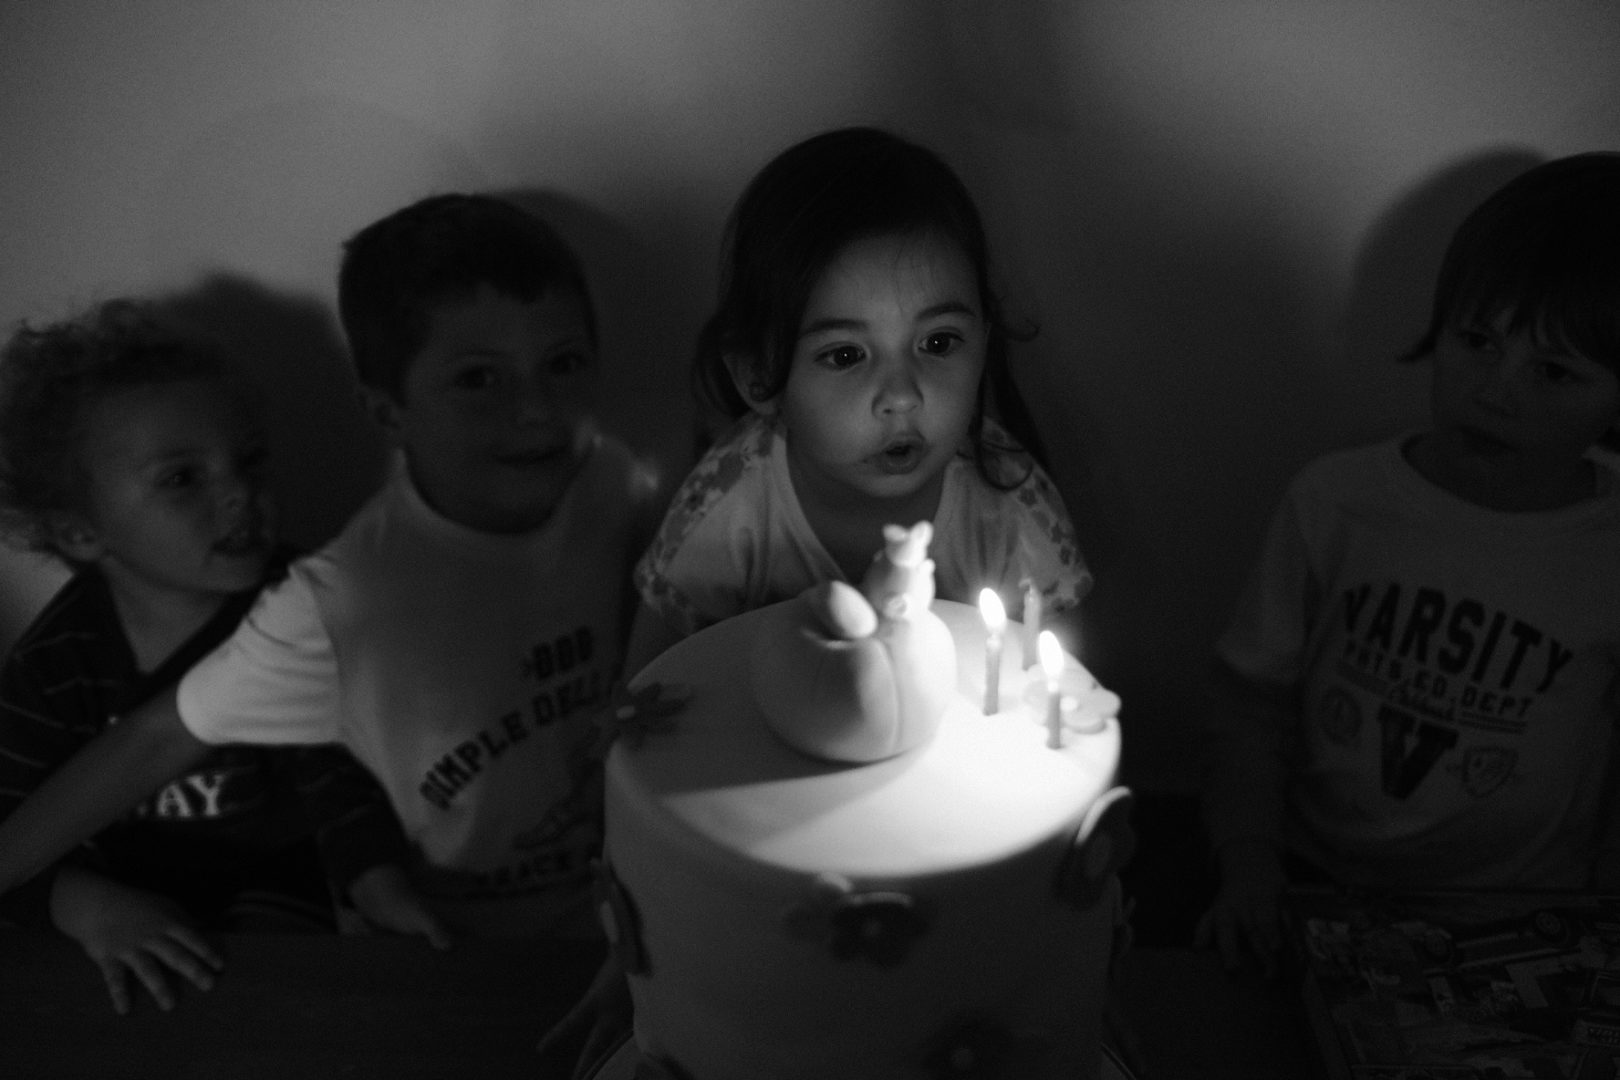 A little girl blows out the candles on her birthday cake